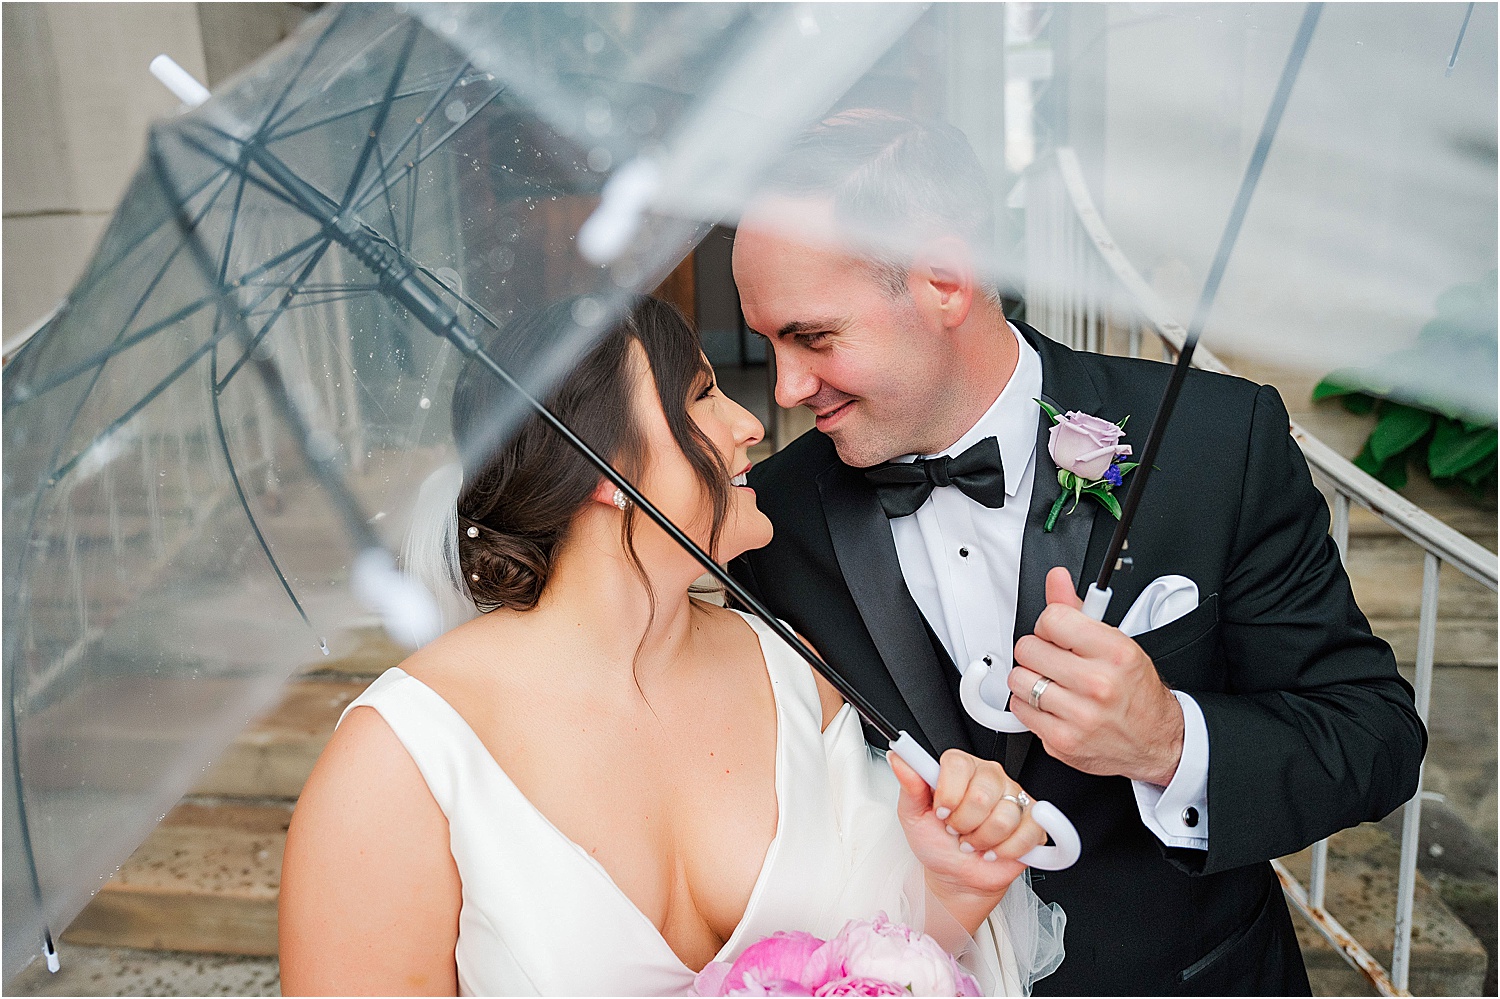 bride and groom pittsburgh rainy wedding day • Wild Weather - Love at a Phipps Conservatory Outdoor Garden Wedding